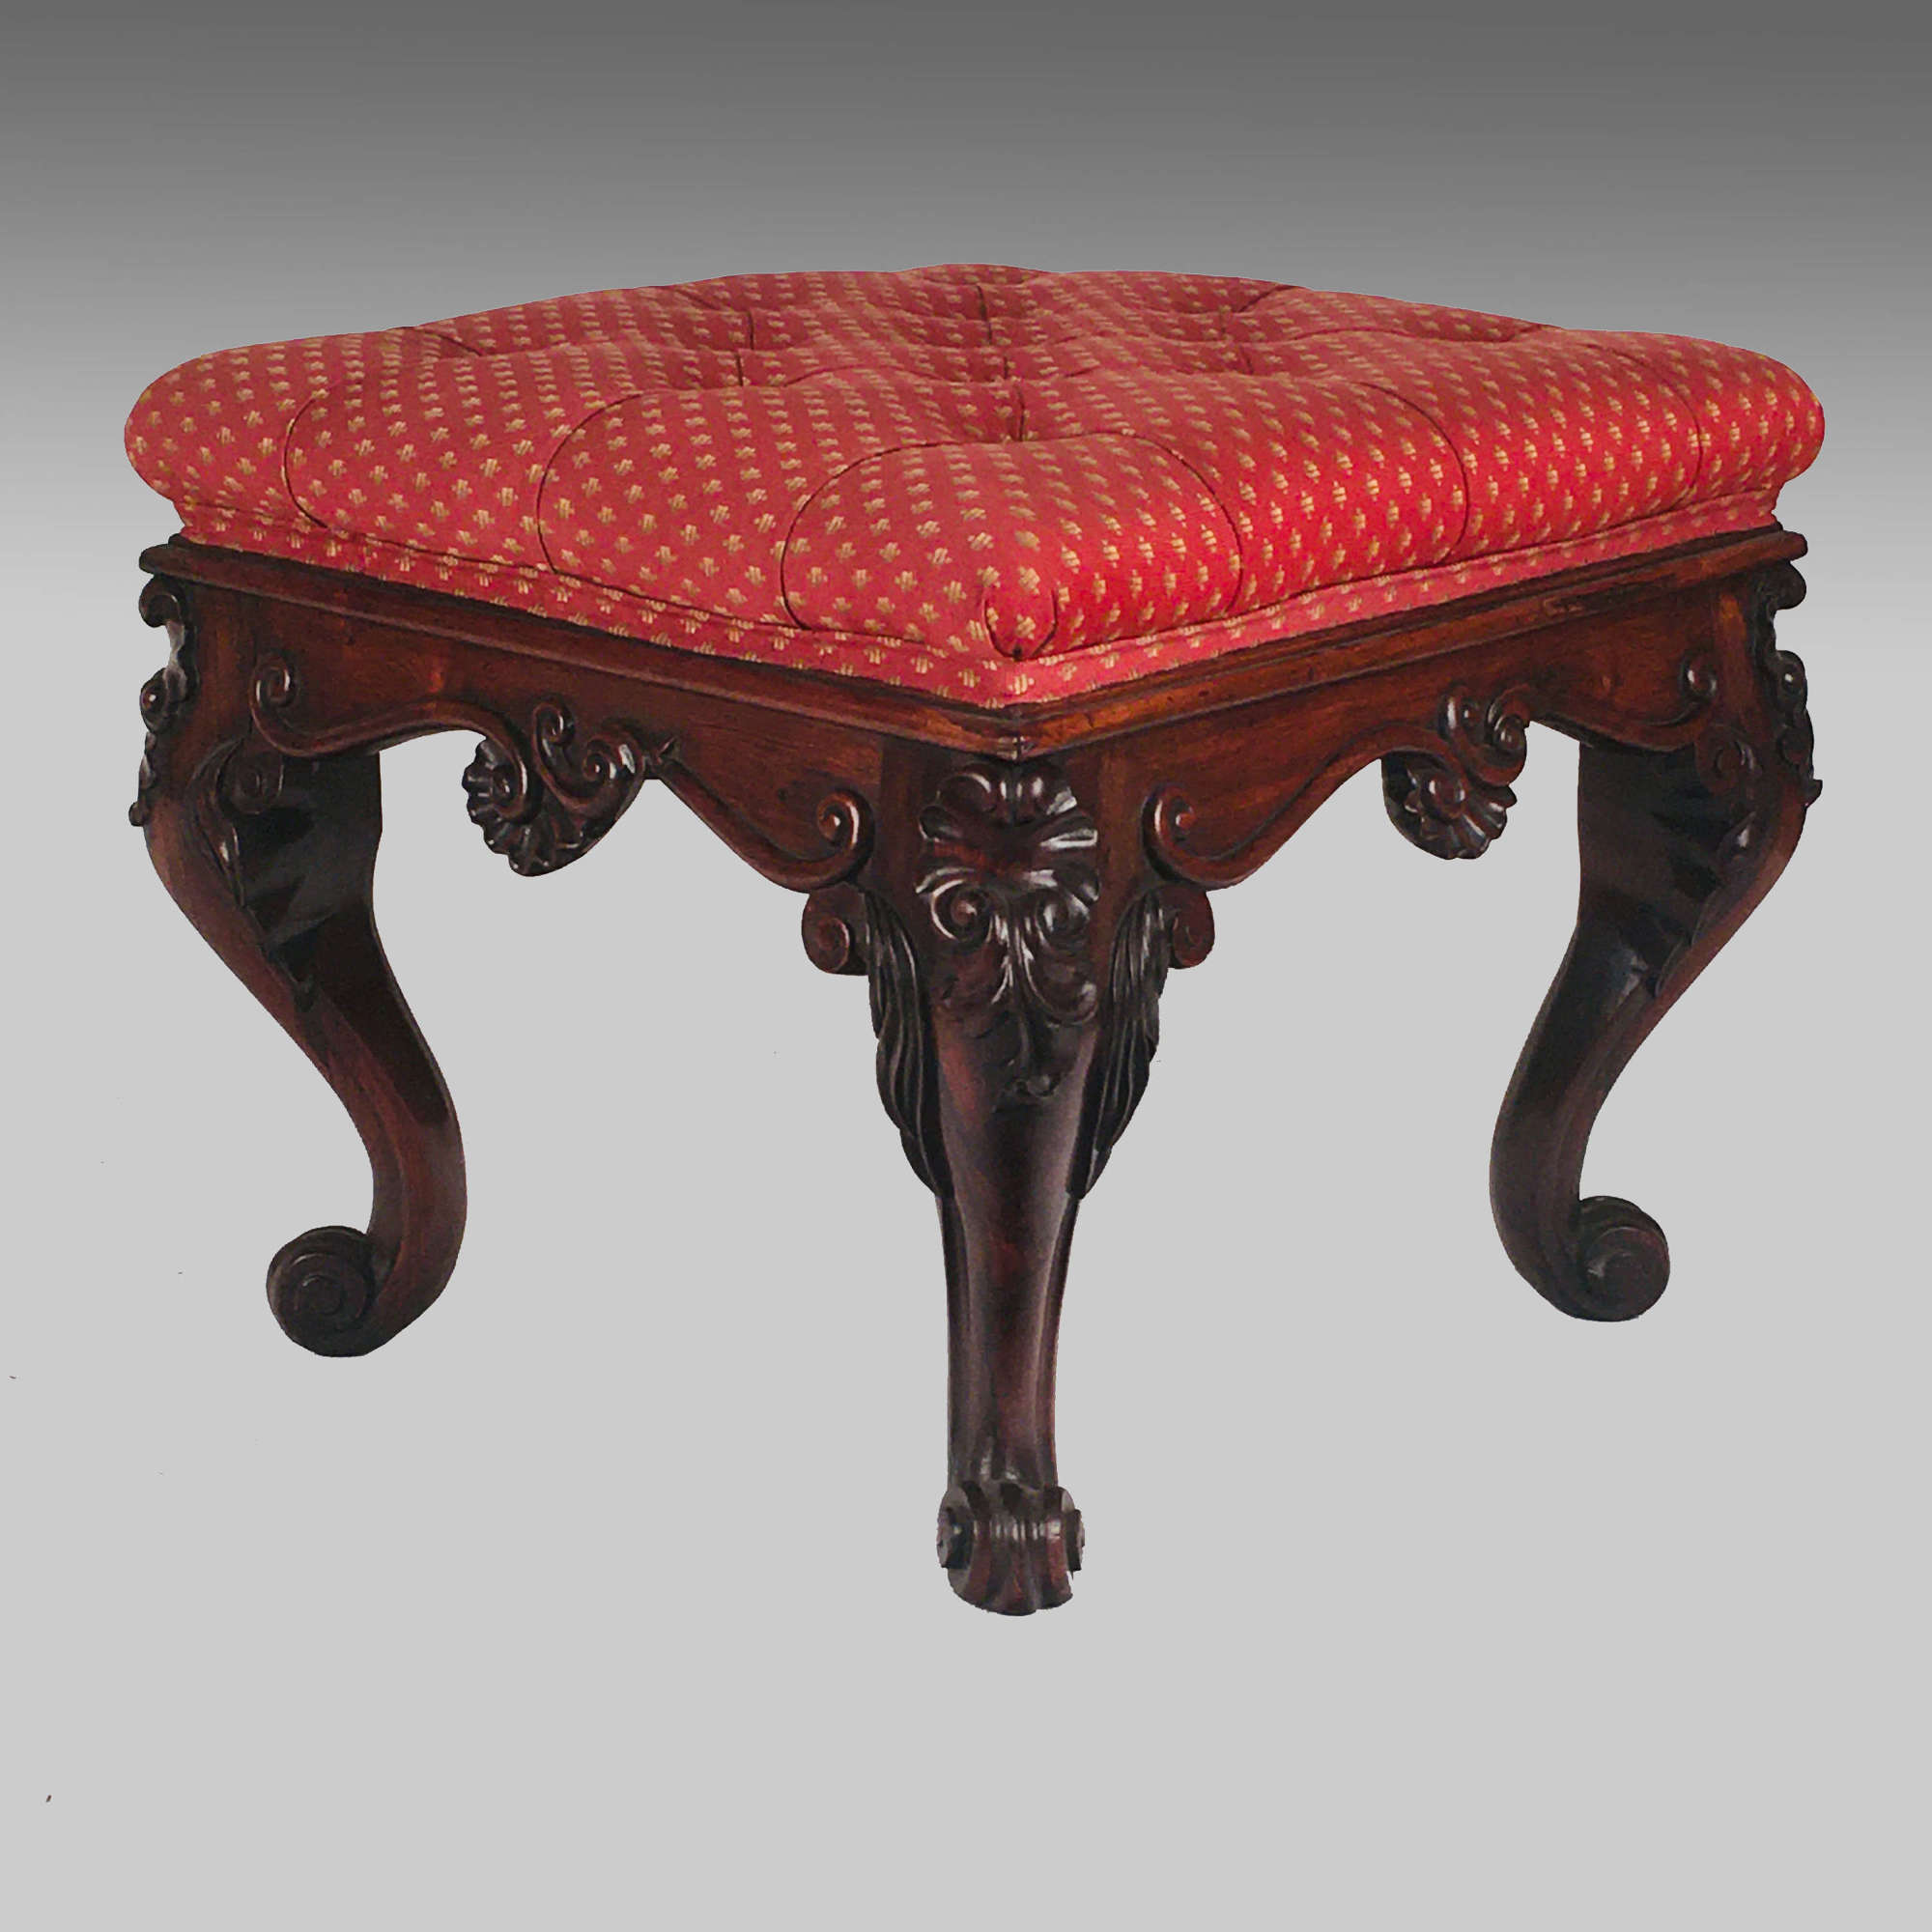 Anglo-Indian rosewood stool